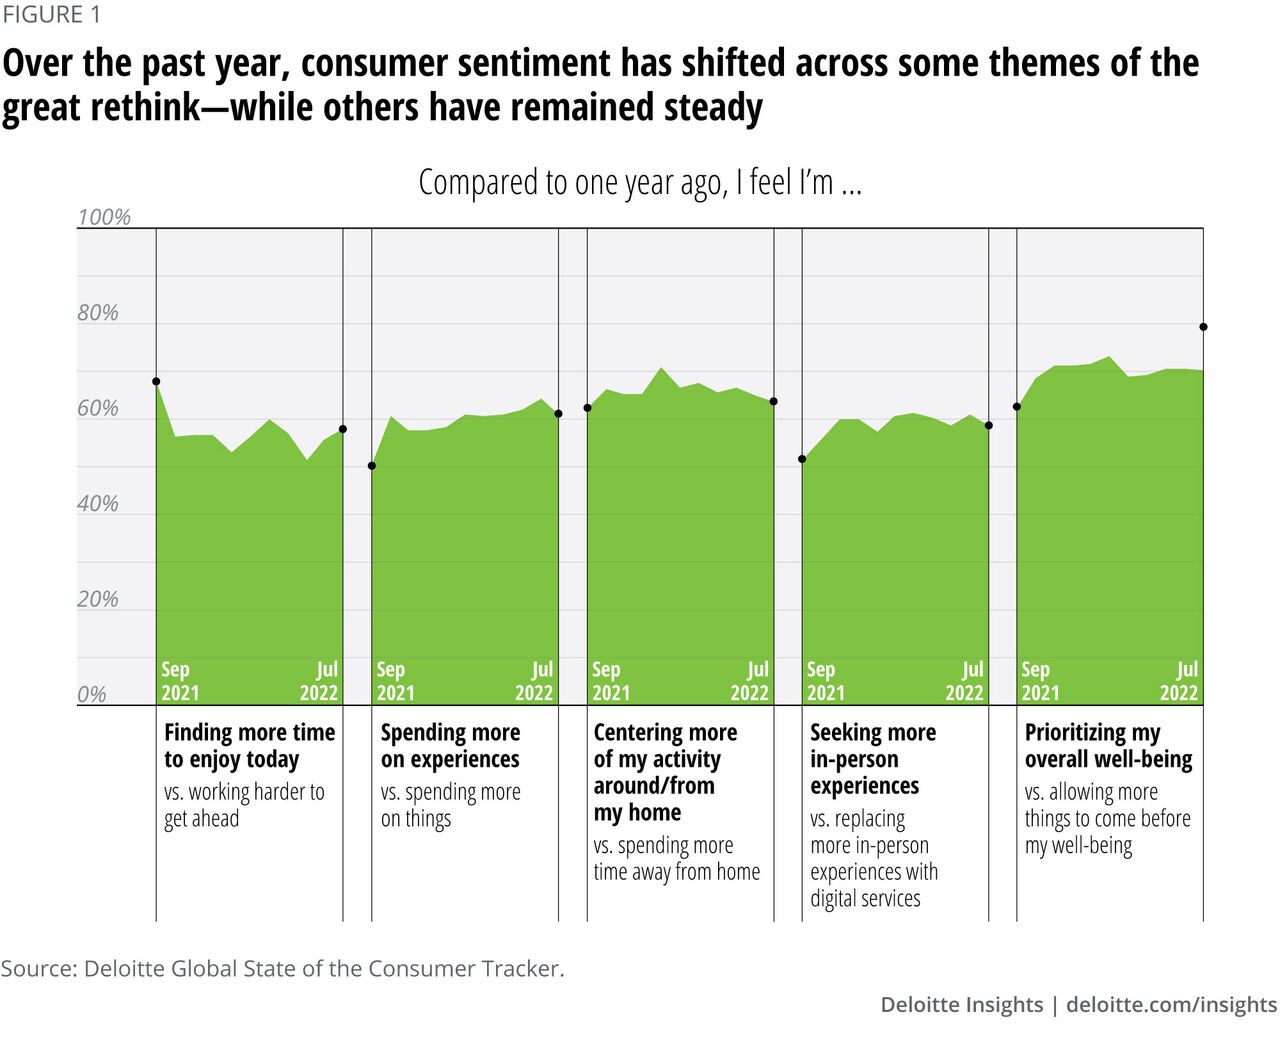 Figure 1. Consumer sentiment around the great rethink has changed over the last year